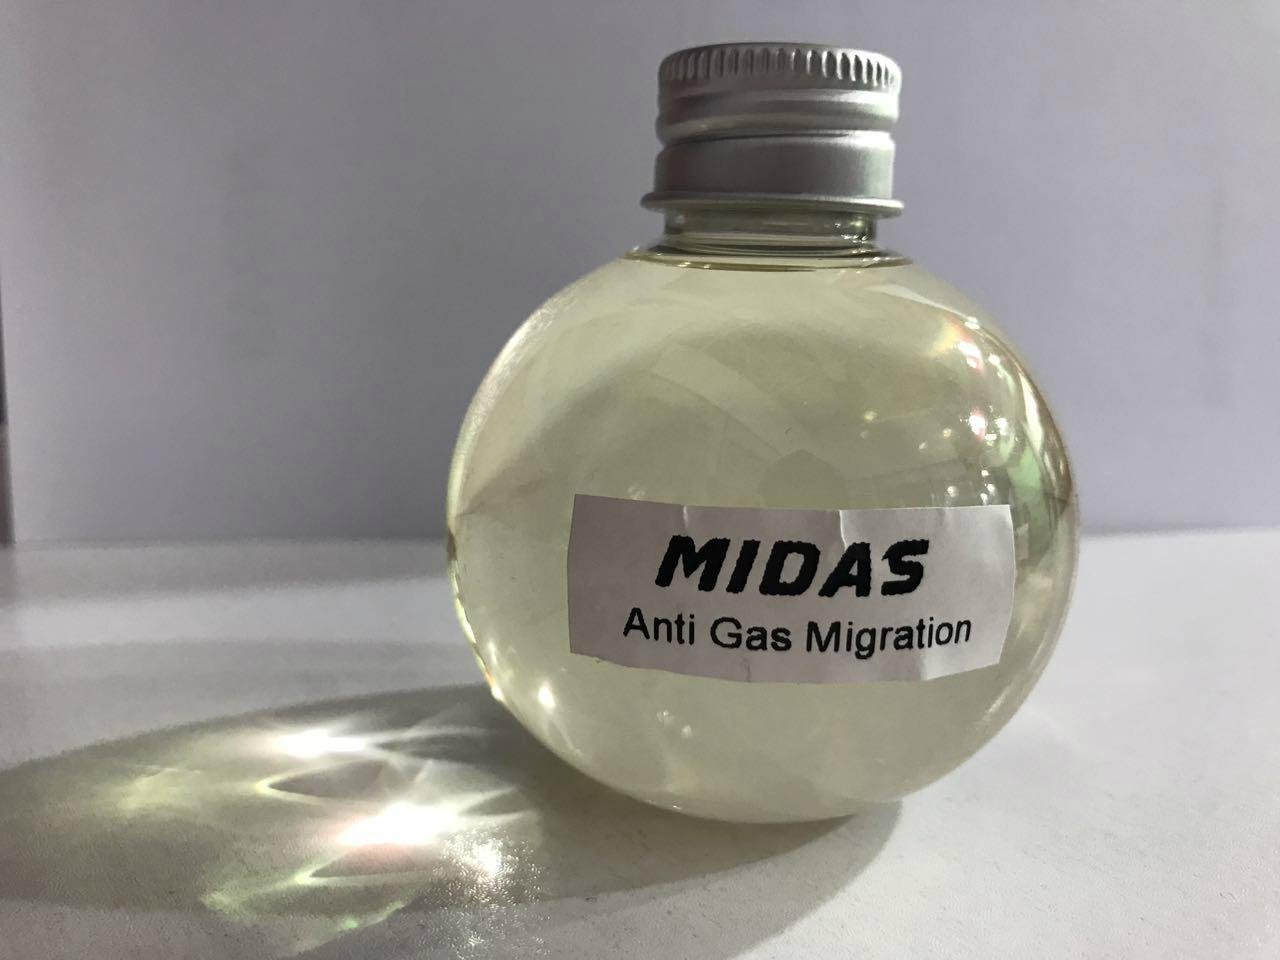 Anti-Gas Migration oilfield cementing additive by MIDAS